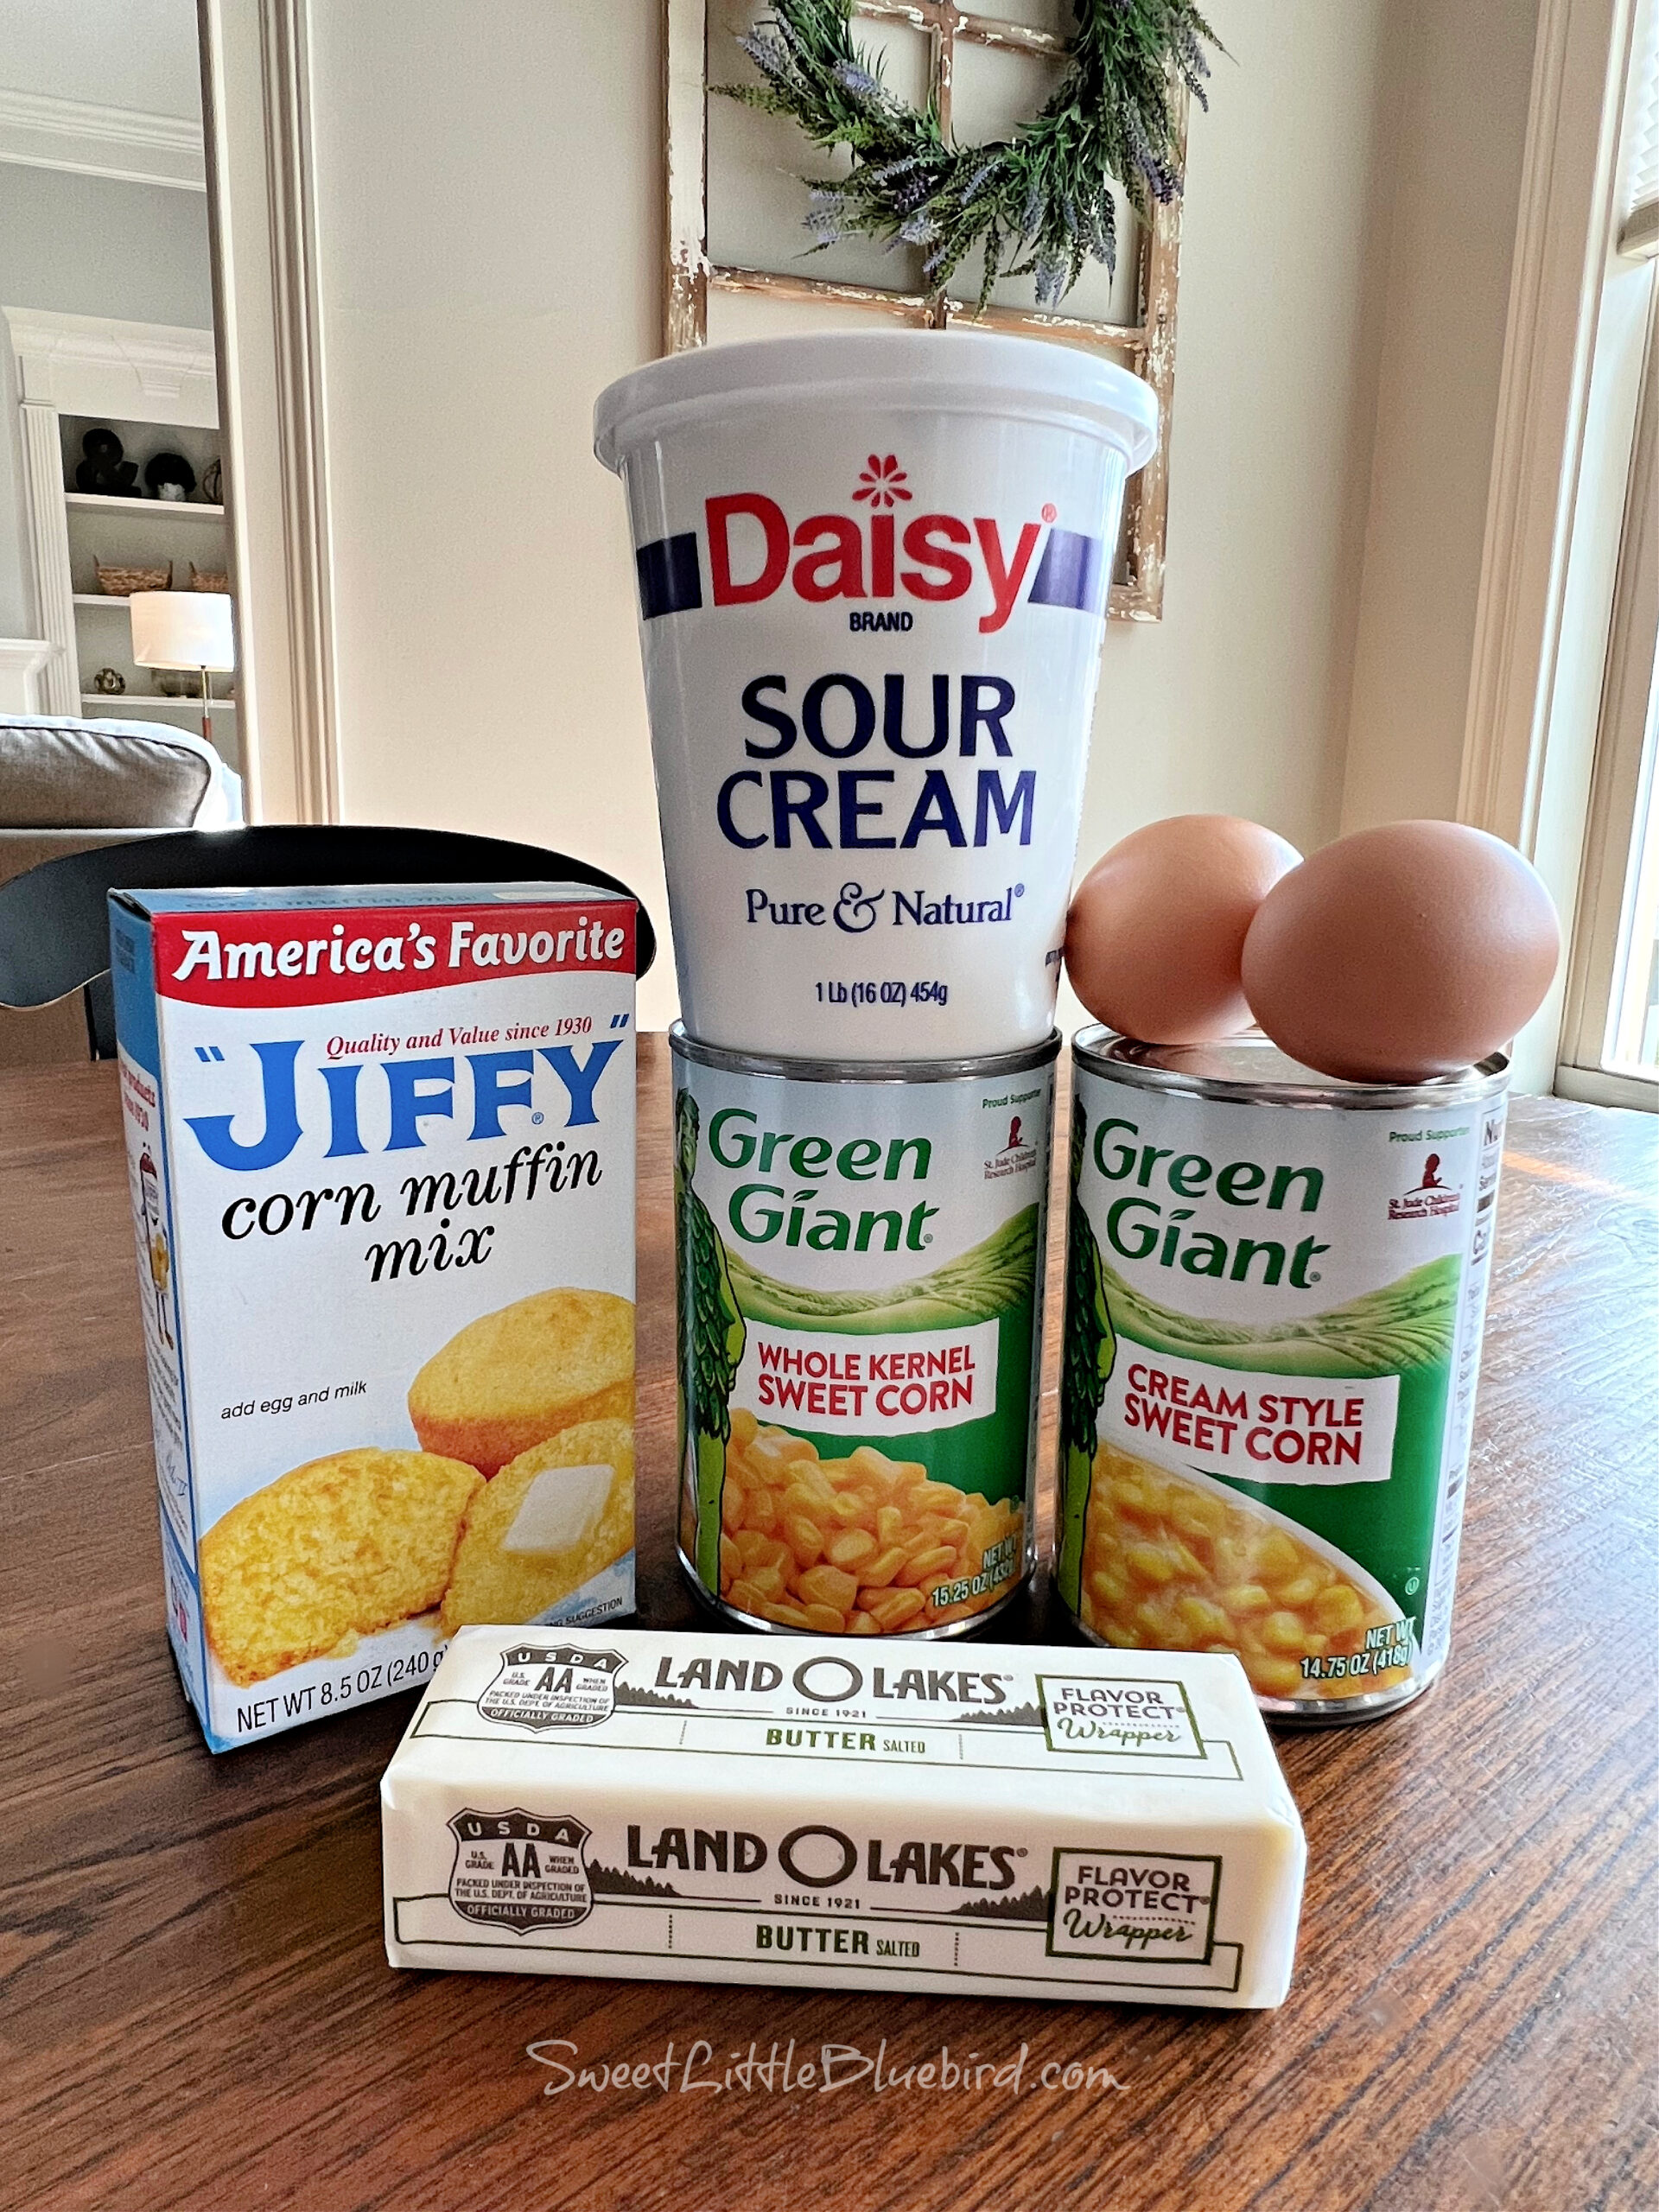 This is a photo of the ingredients needed to make the corn casserole placed neatly together on a table - a box of Jiffy Corn Muffin Mix, container of sour cream, stick of butter, 2 eggs, can of cream style corn and a can of whole kernel corn. 